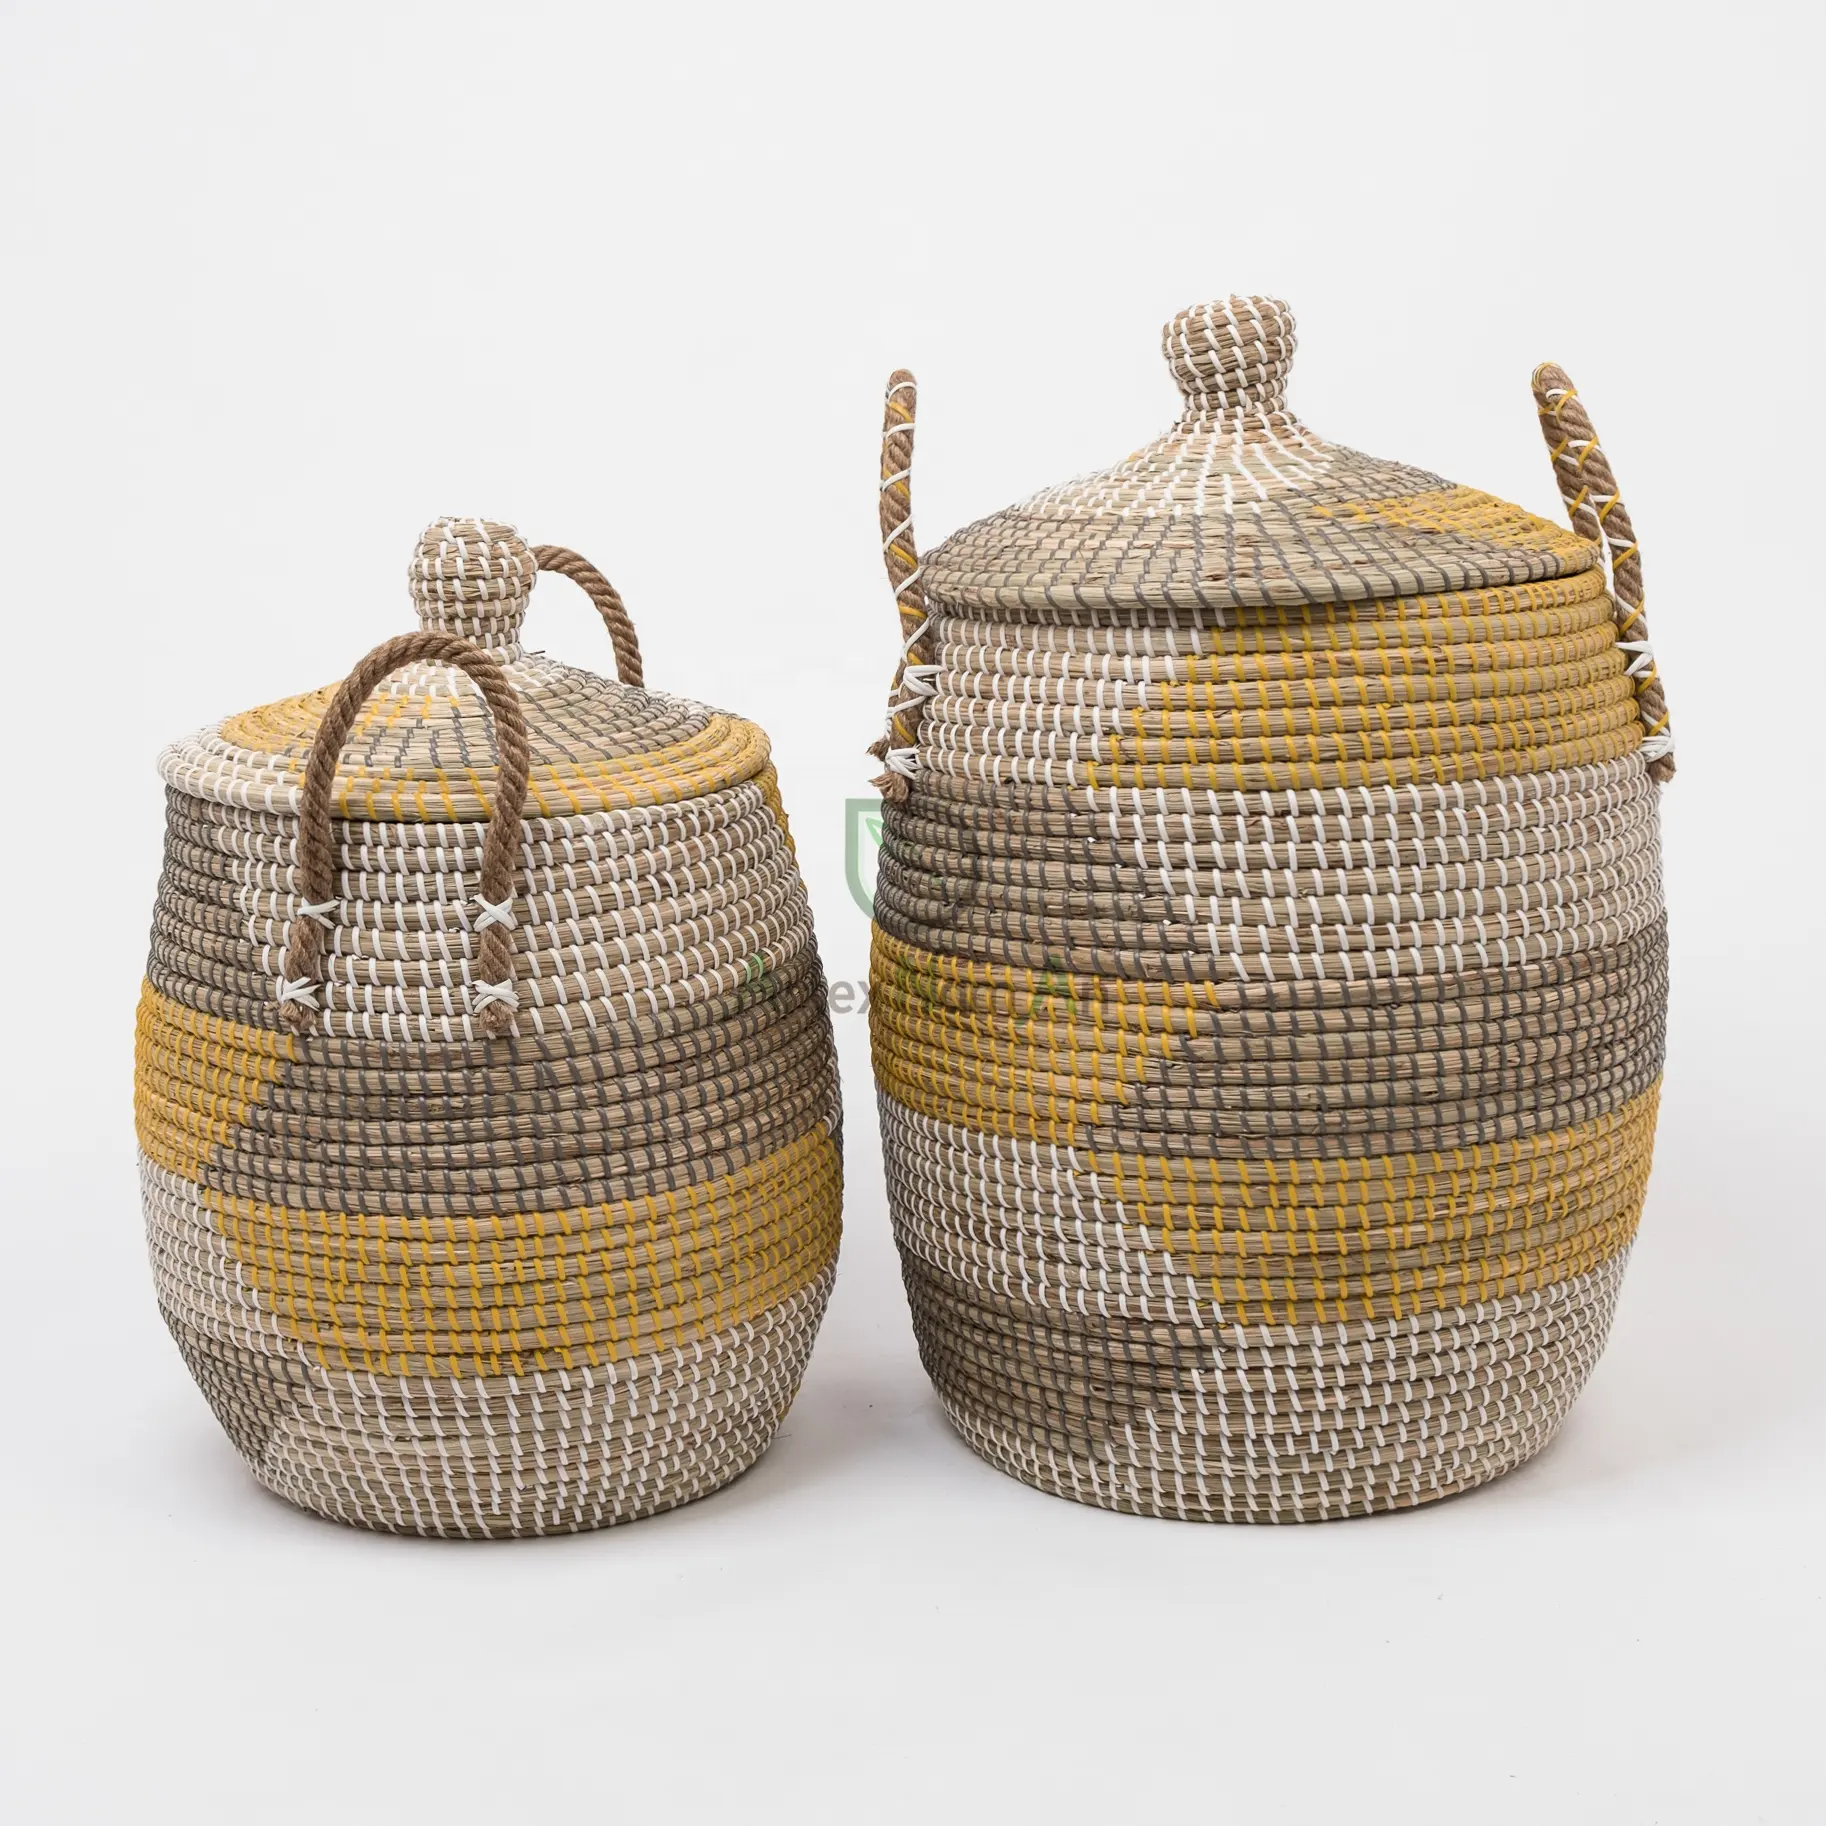 Handmade african seagrass storage laundry hamper basket also woven giant basket with lids and handles